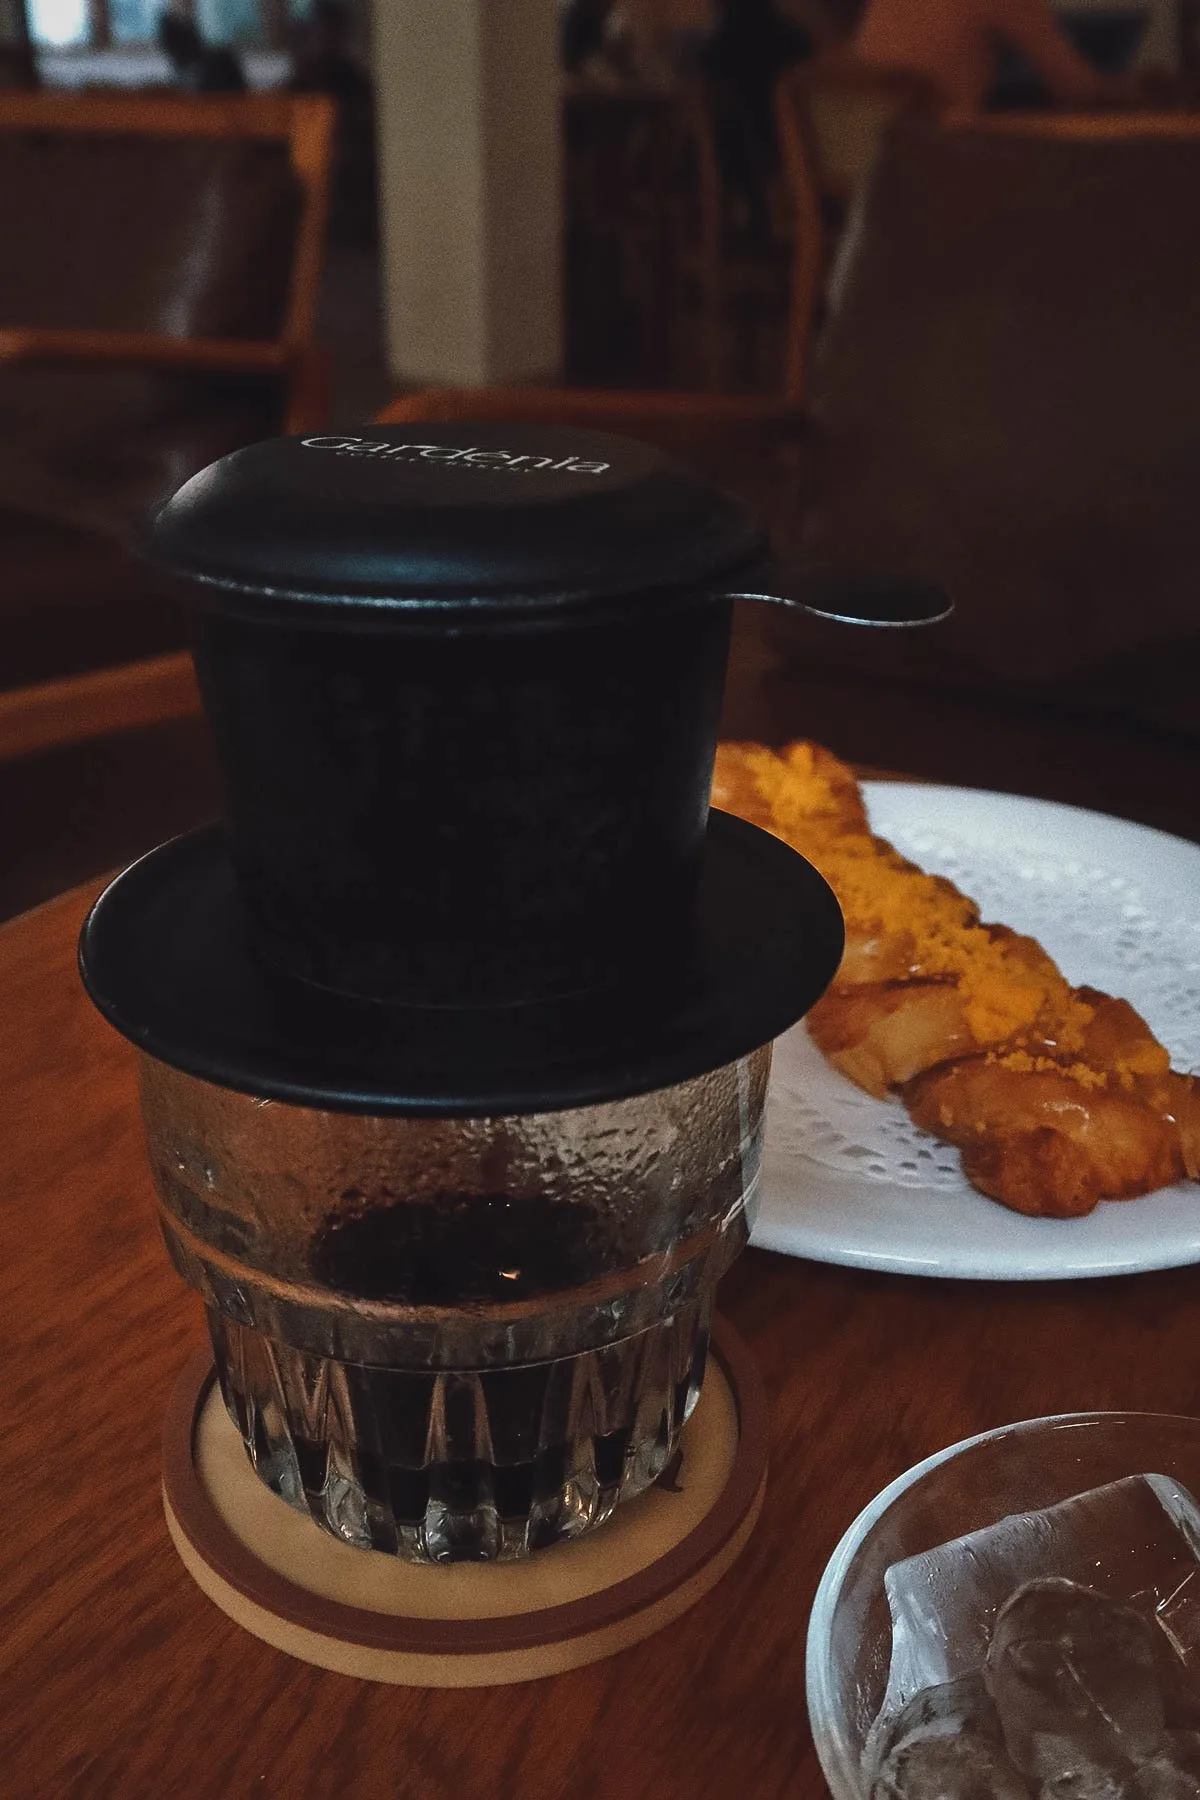 Drip coffee and a pastry at a cafe in Danang, Vietnam